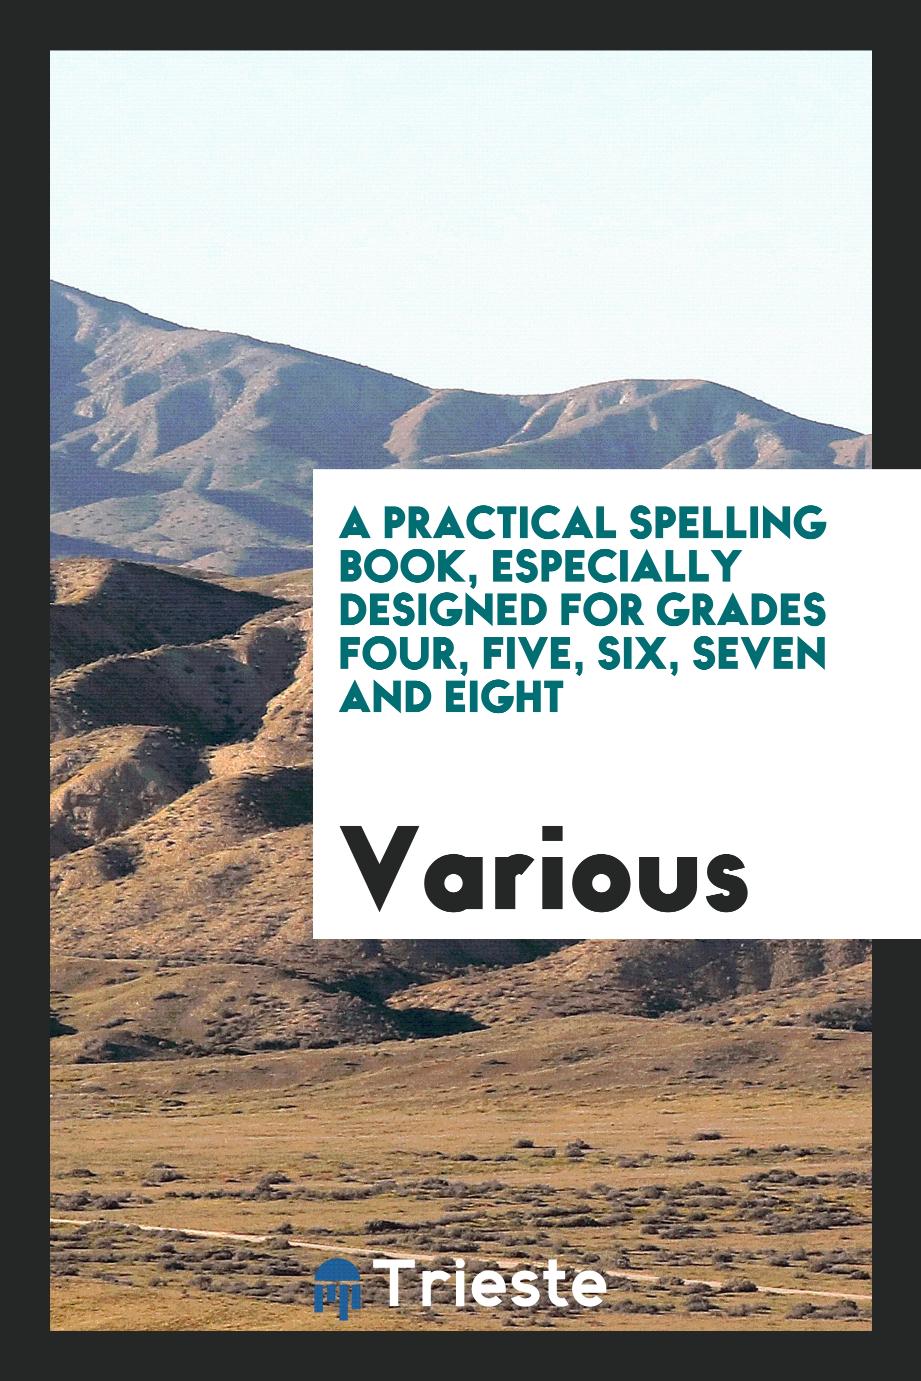 A Practical Spelling Book, Especially Designed for Grades Four, Five, Six, Seven and Eight